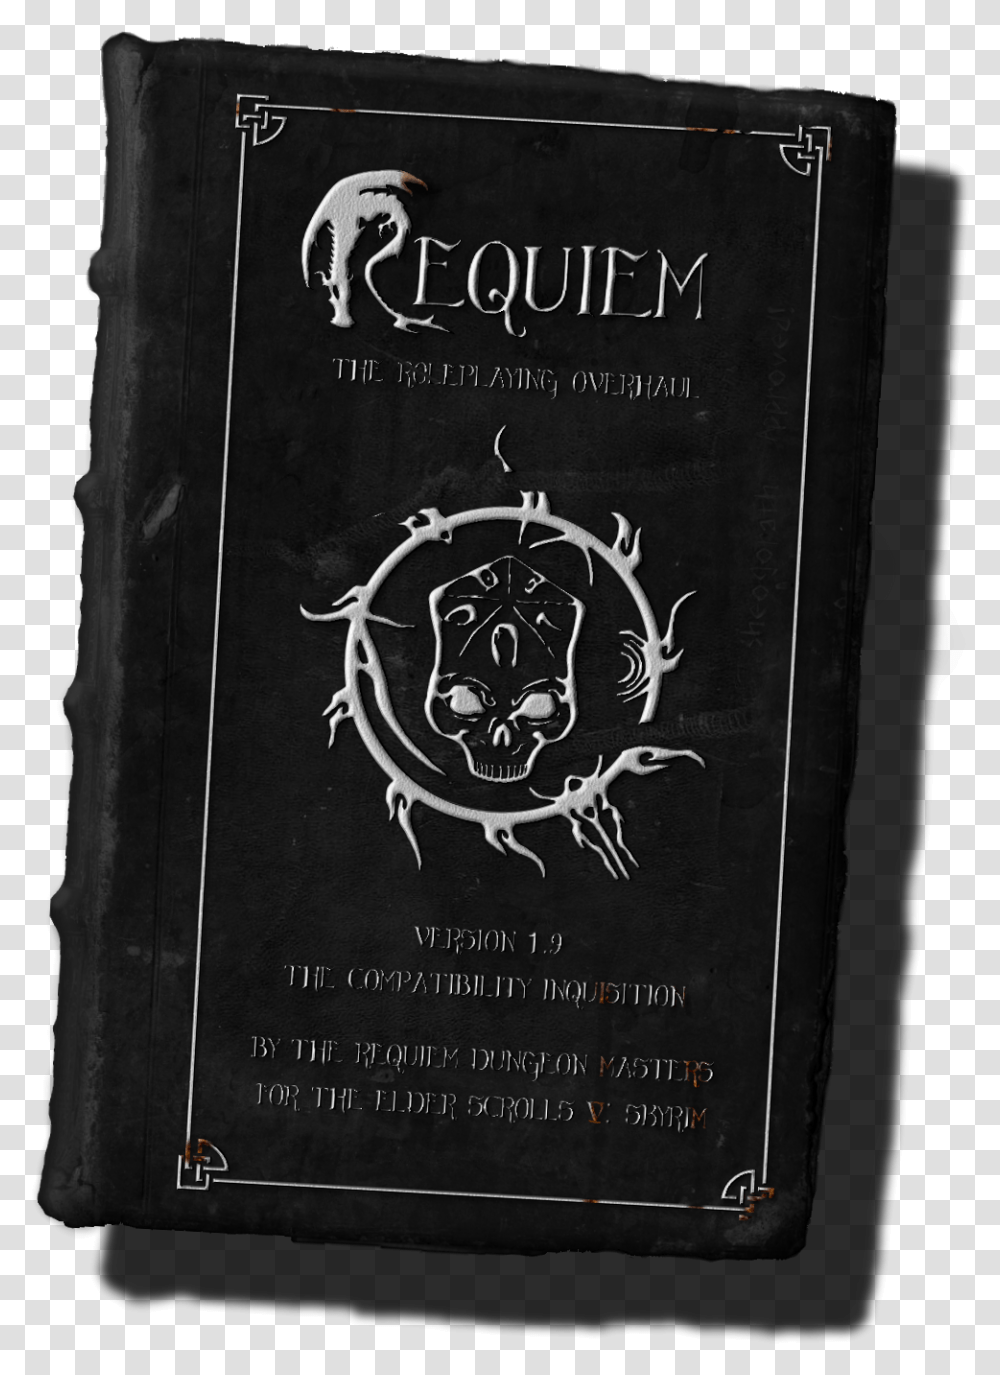 One Day In Skyrim Requiem Book Cover, Poster, Advertisement, Novel Transparent Png